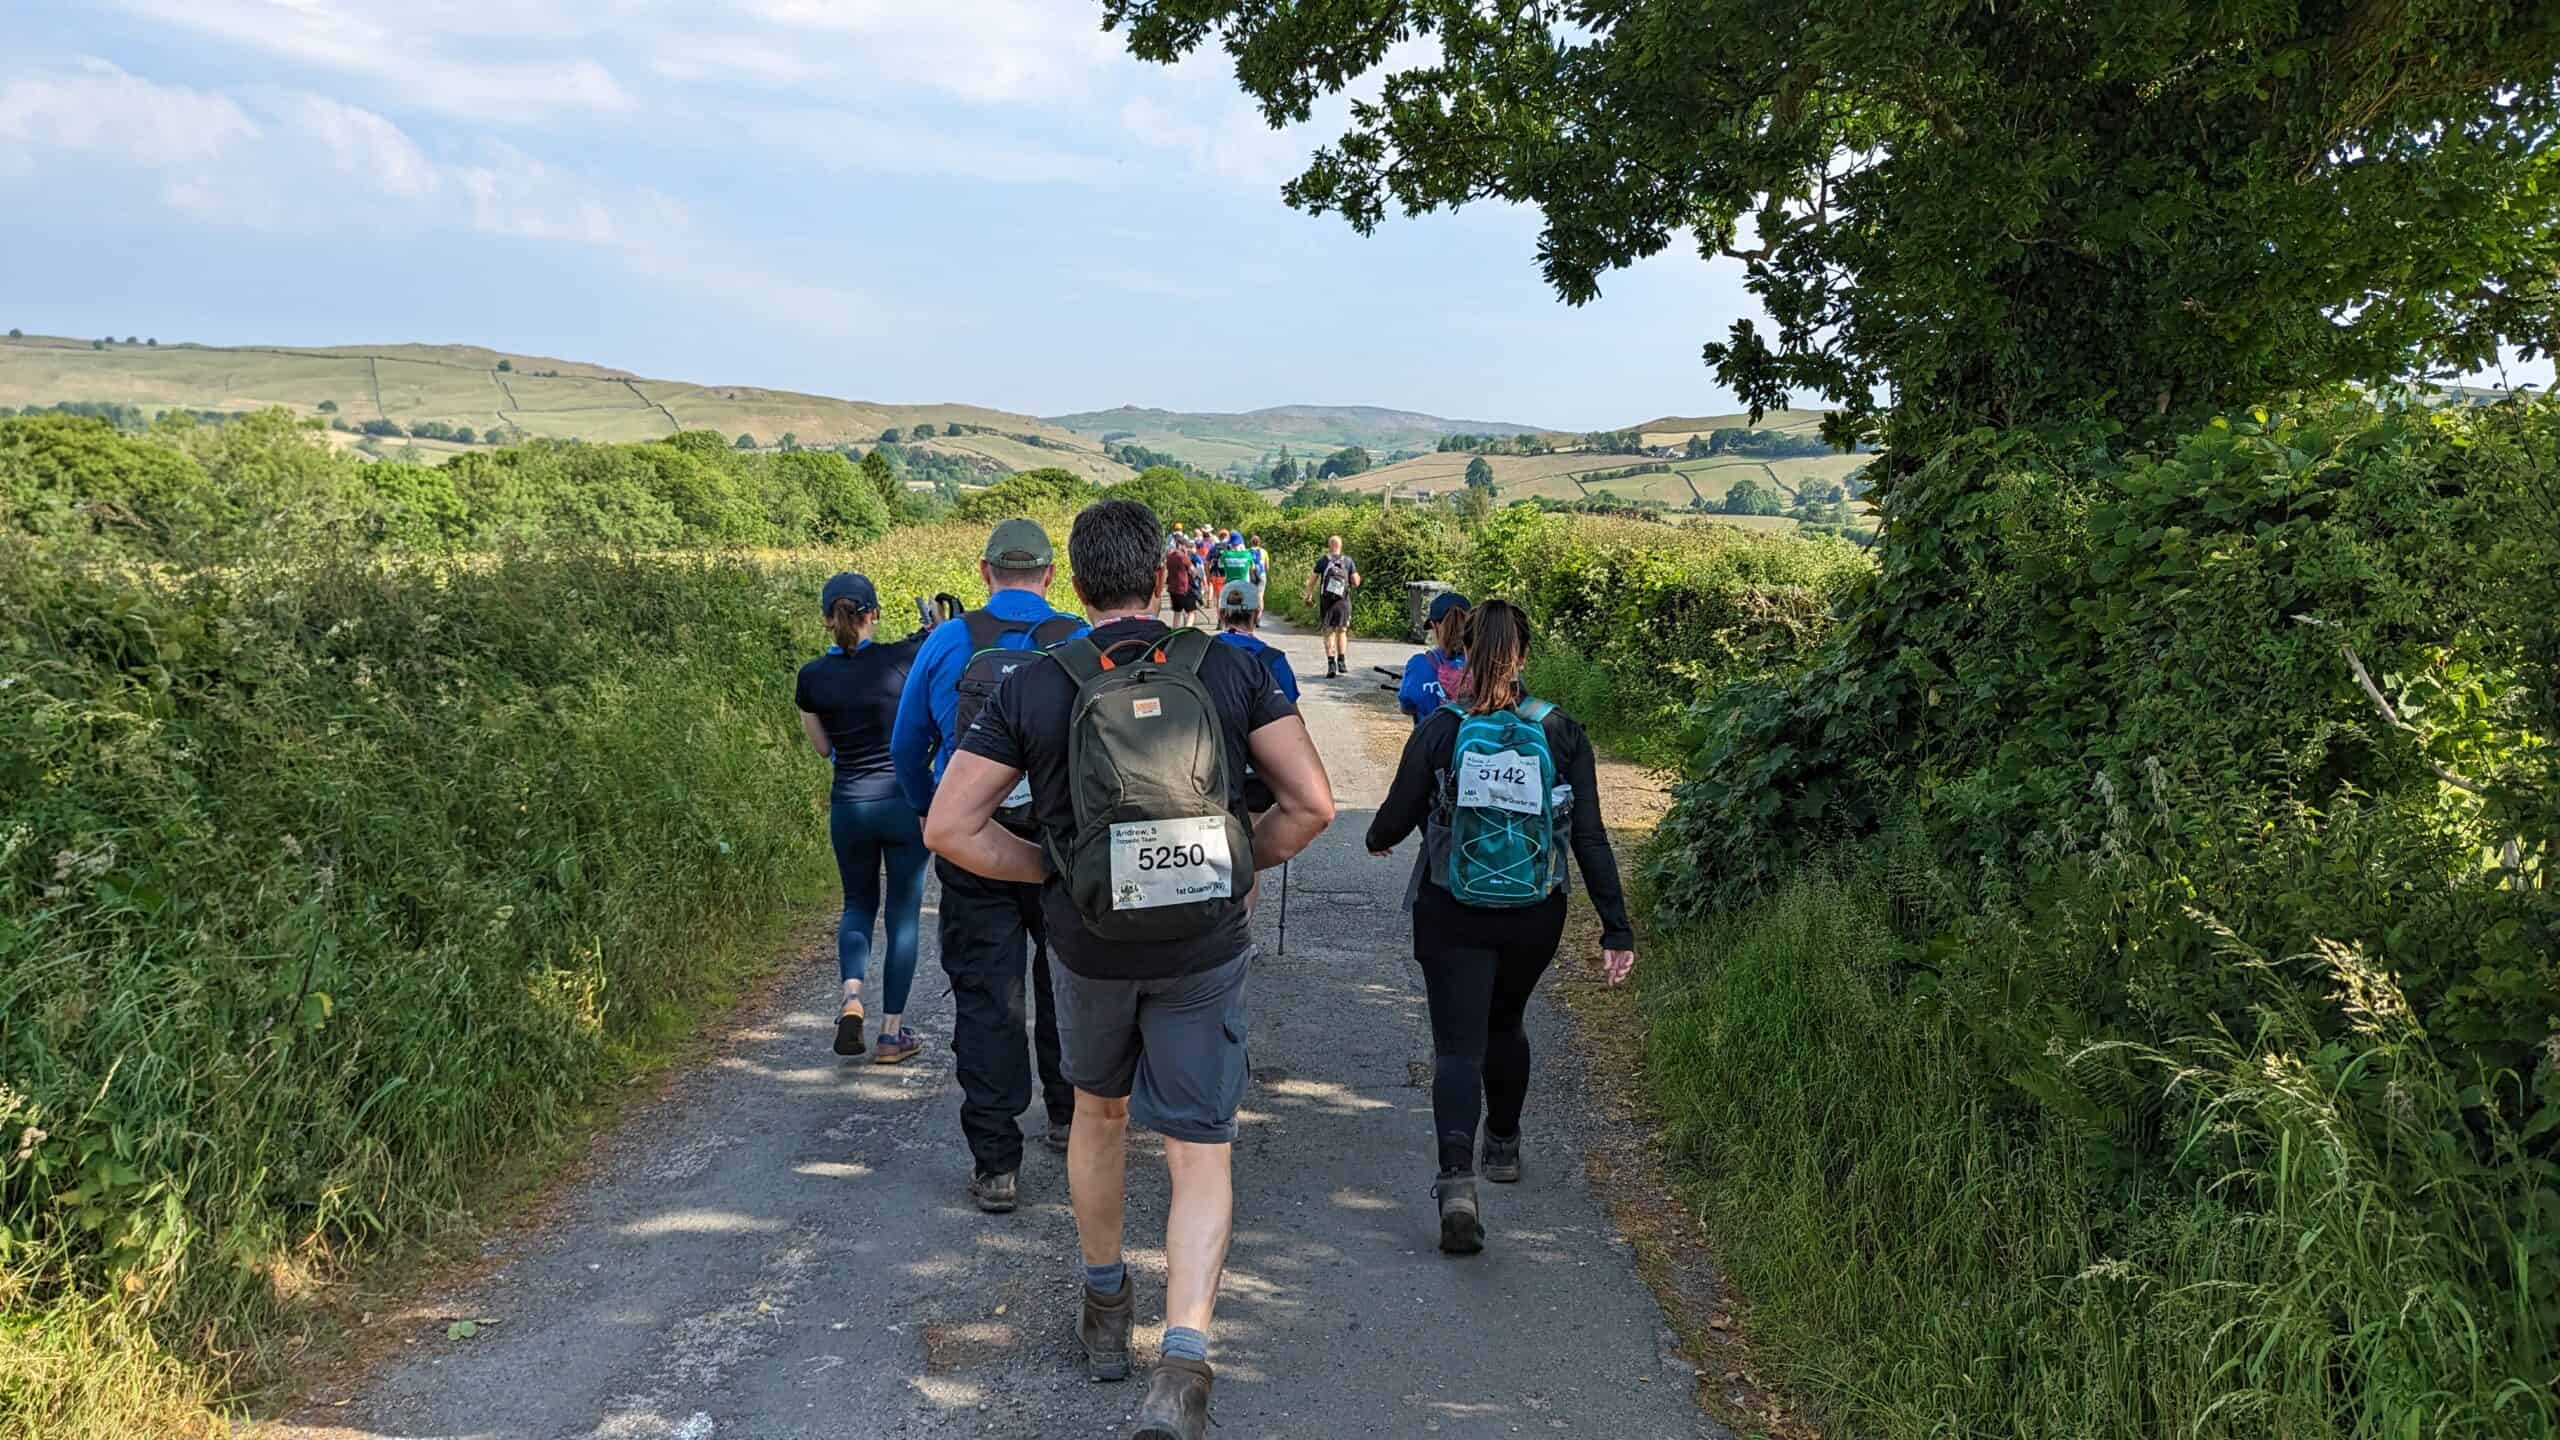  the Torpedo team on an Ultra Challenge to walk 30 kilometres in the Lake District